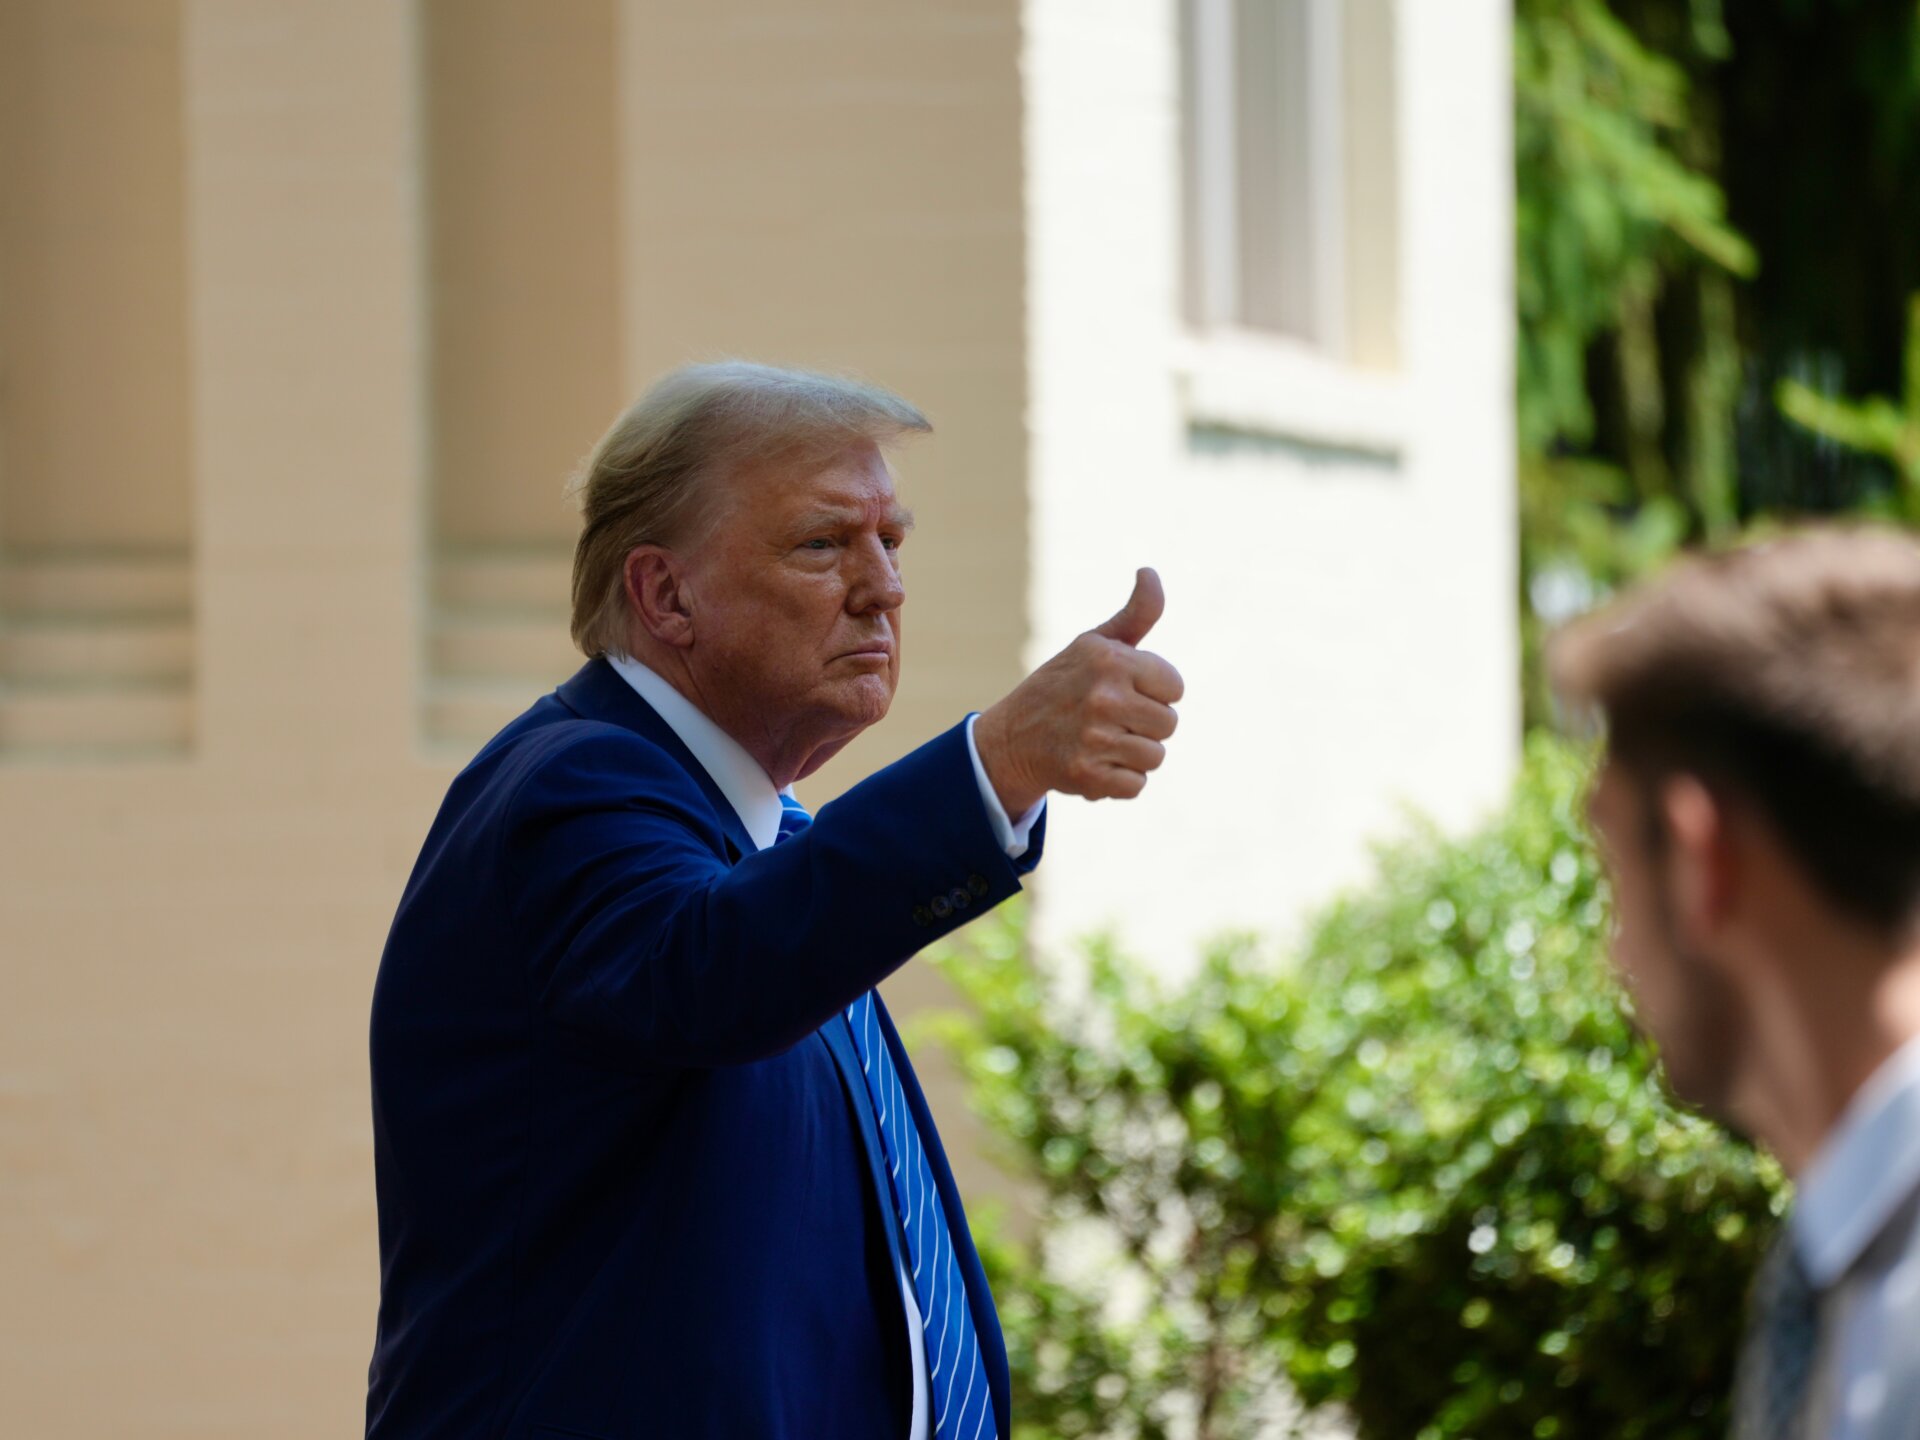 Donald Trump giving a thumbs up